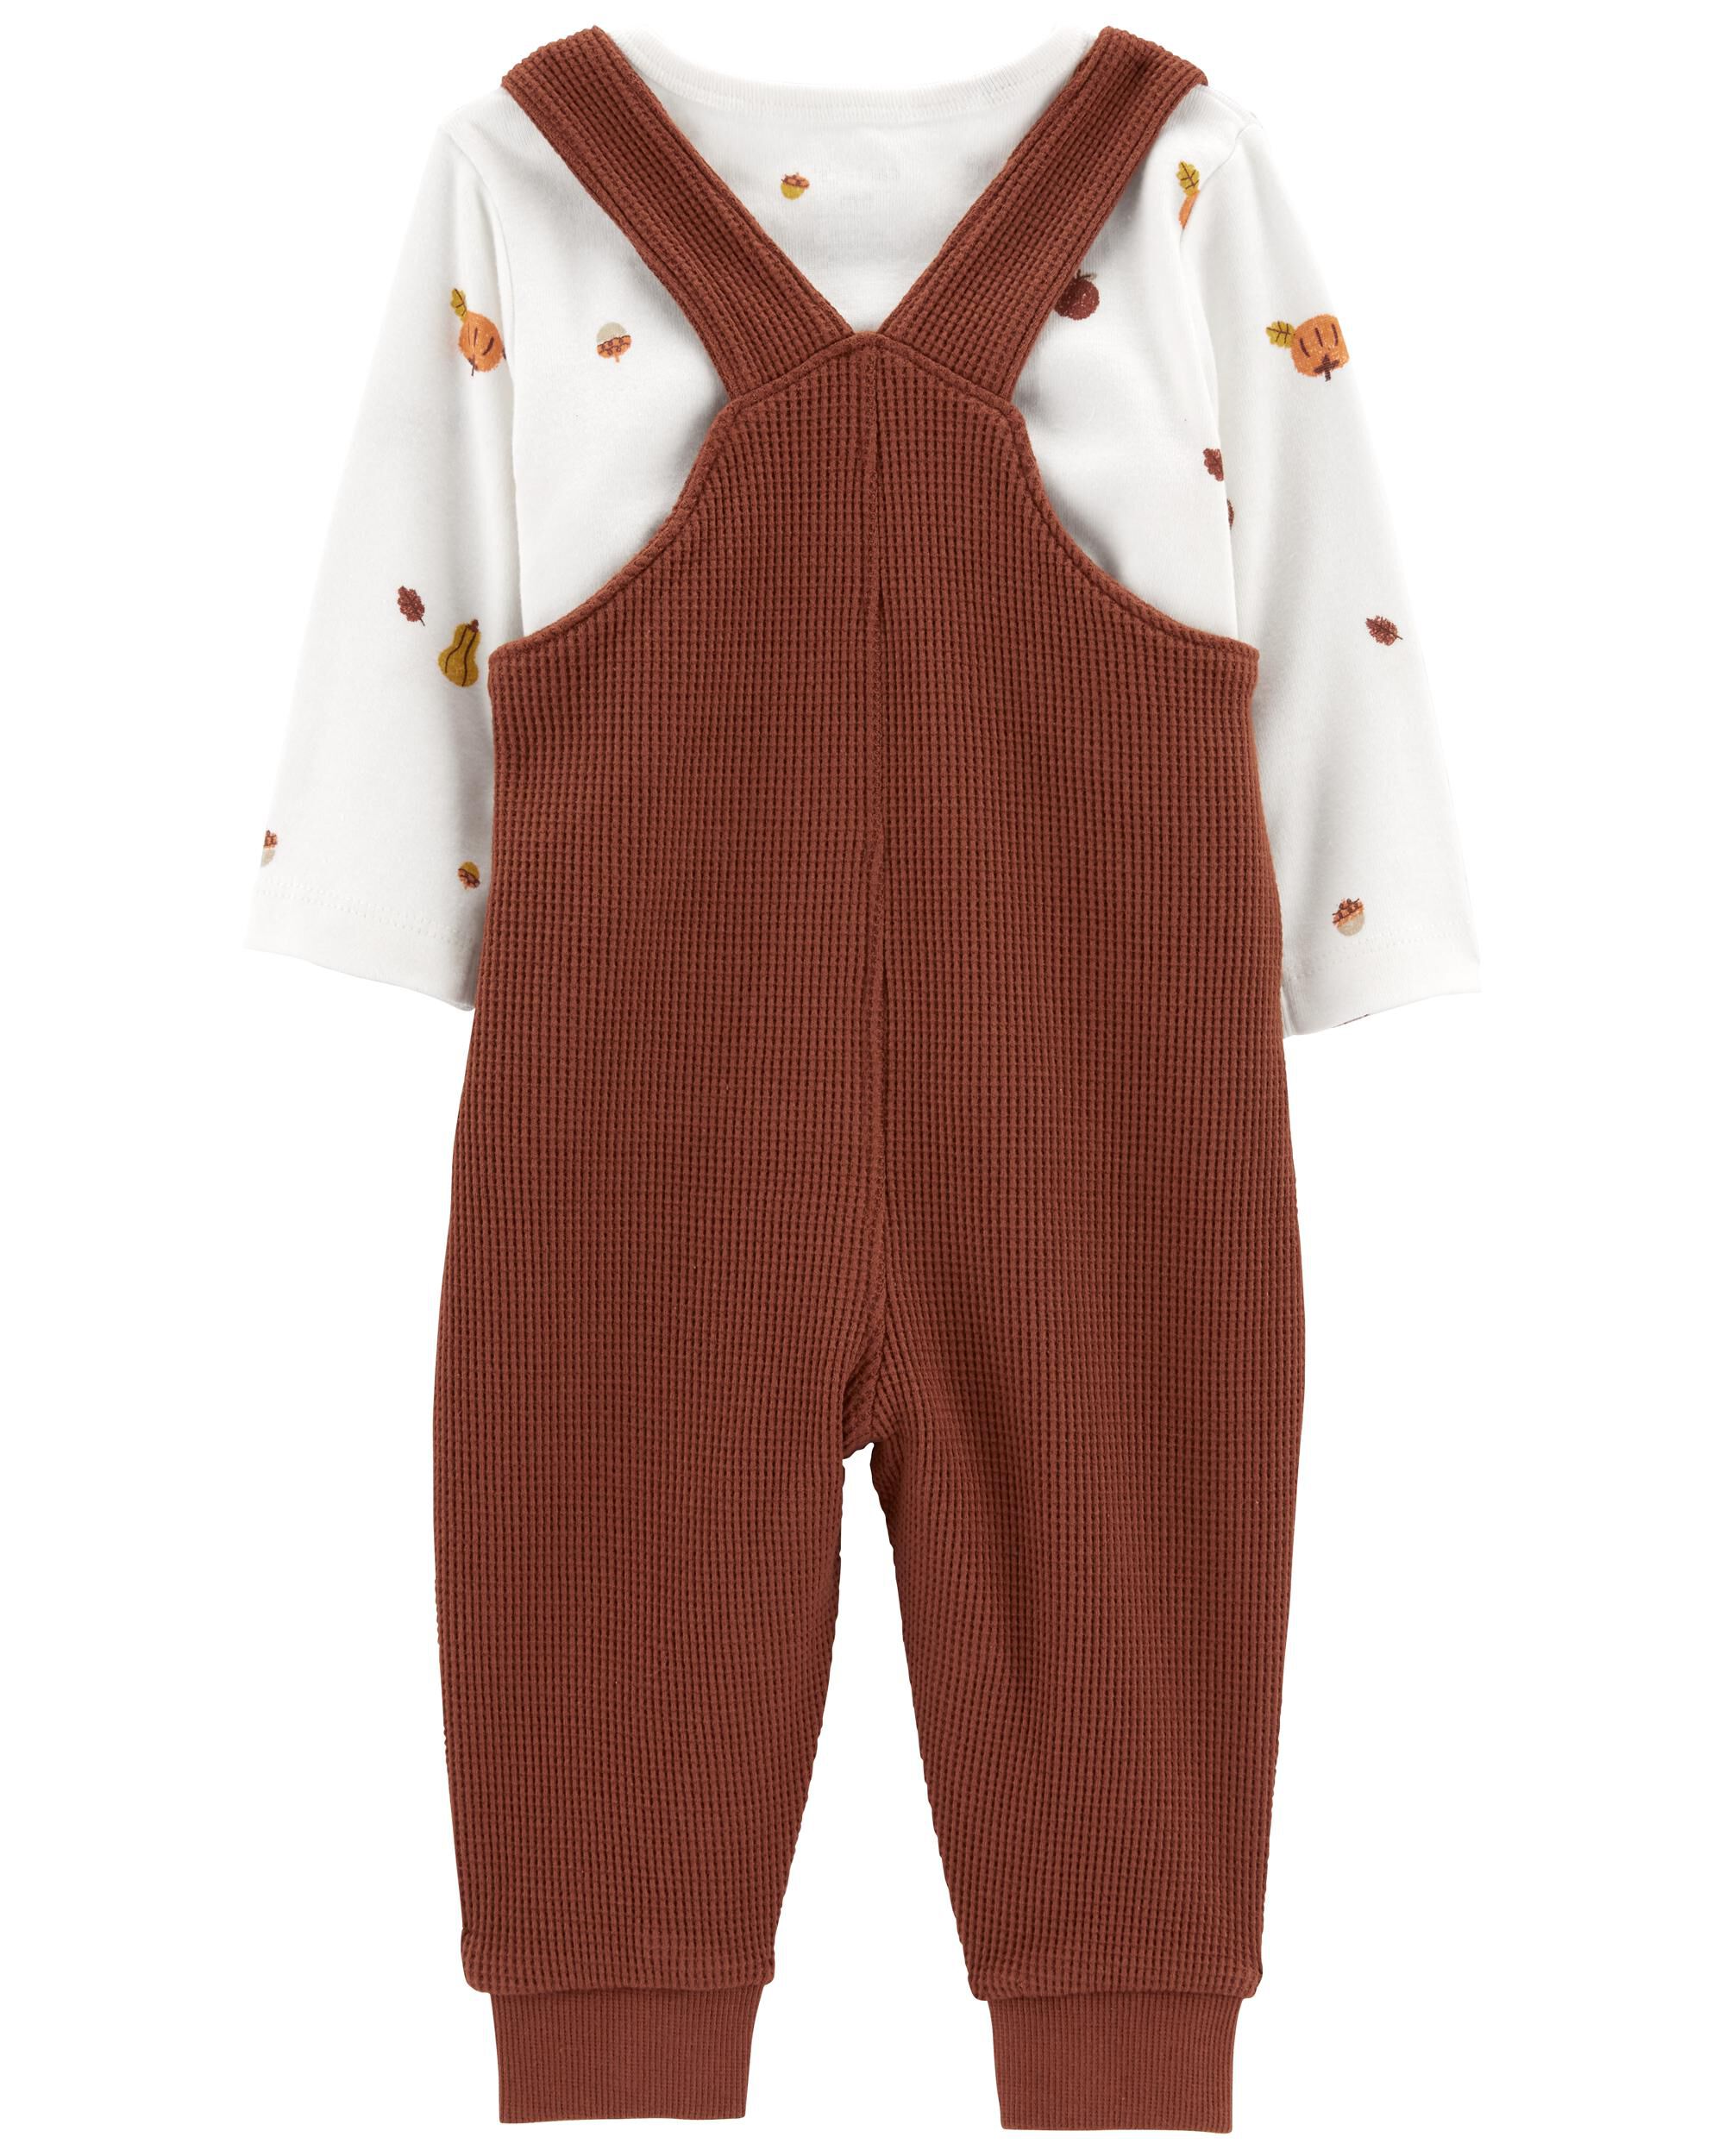 Brown/White Baby 3-Piece Thanksgiving Outfit Set | carters.com